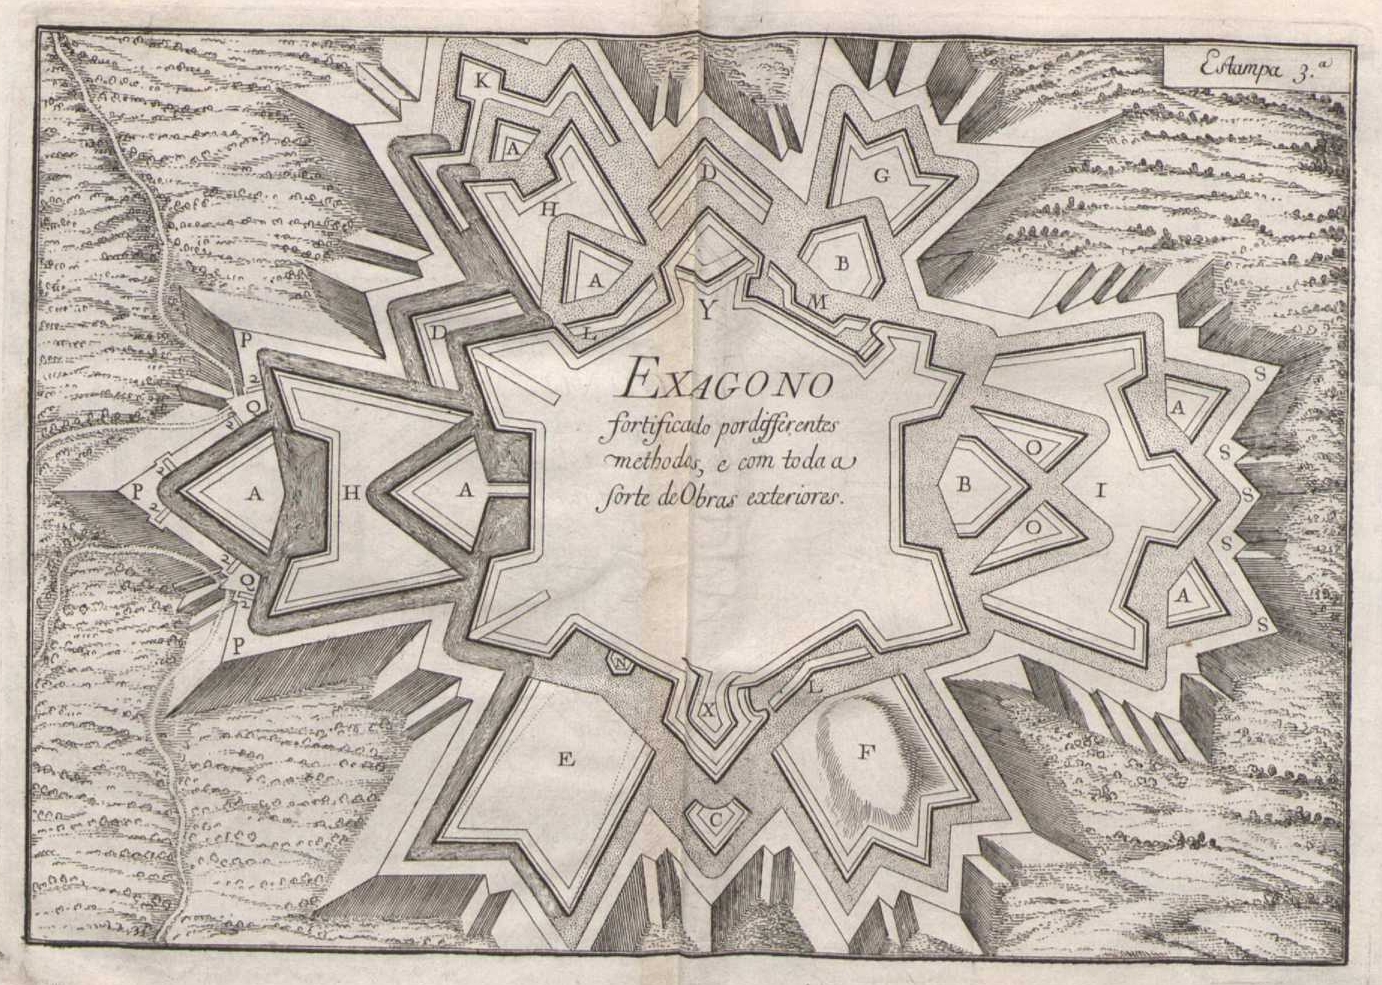 Exagono map of fortification engineering strategies 1729